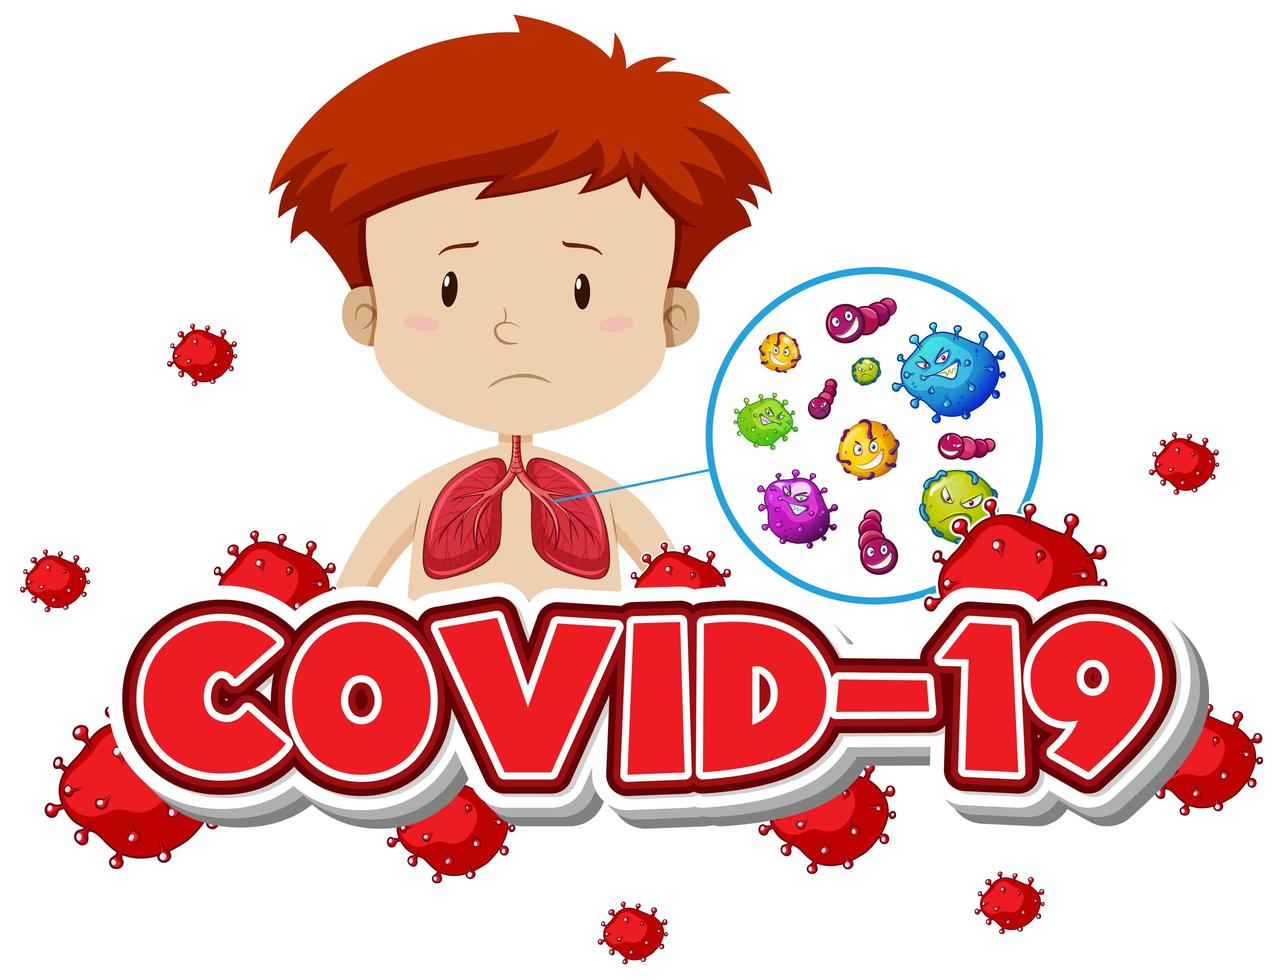 Covid-19 with boy and bad lungs vector